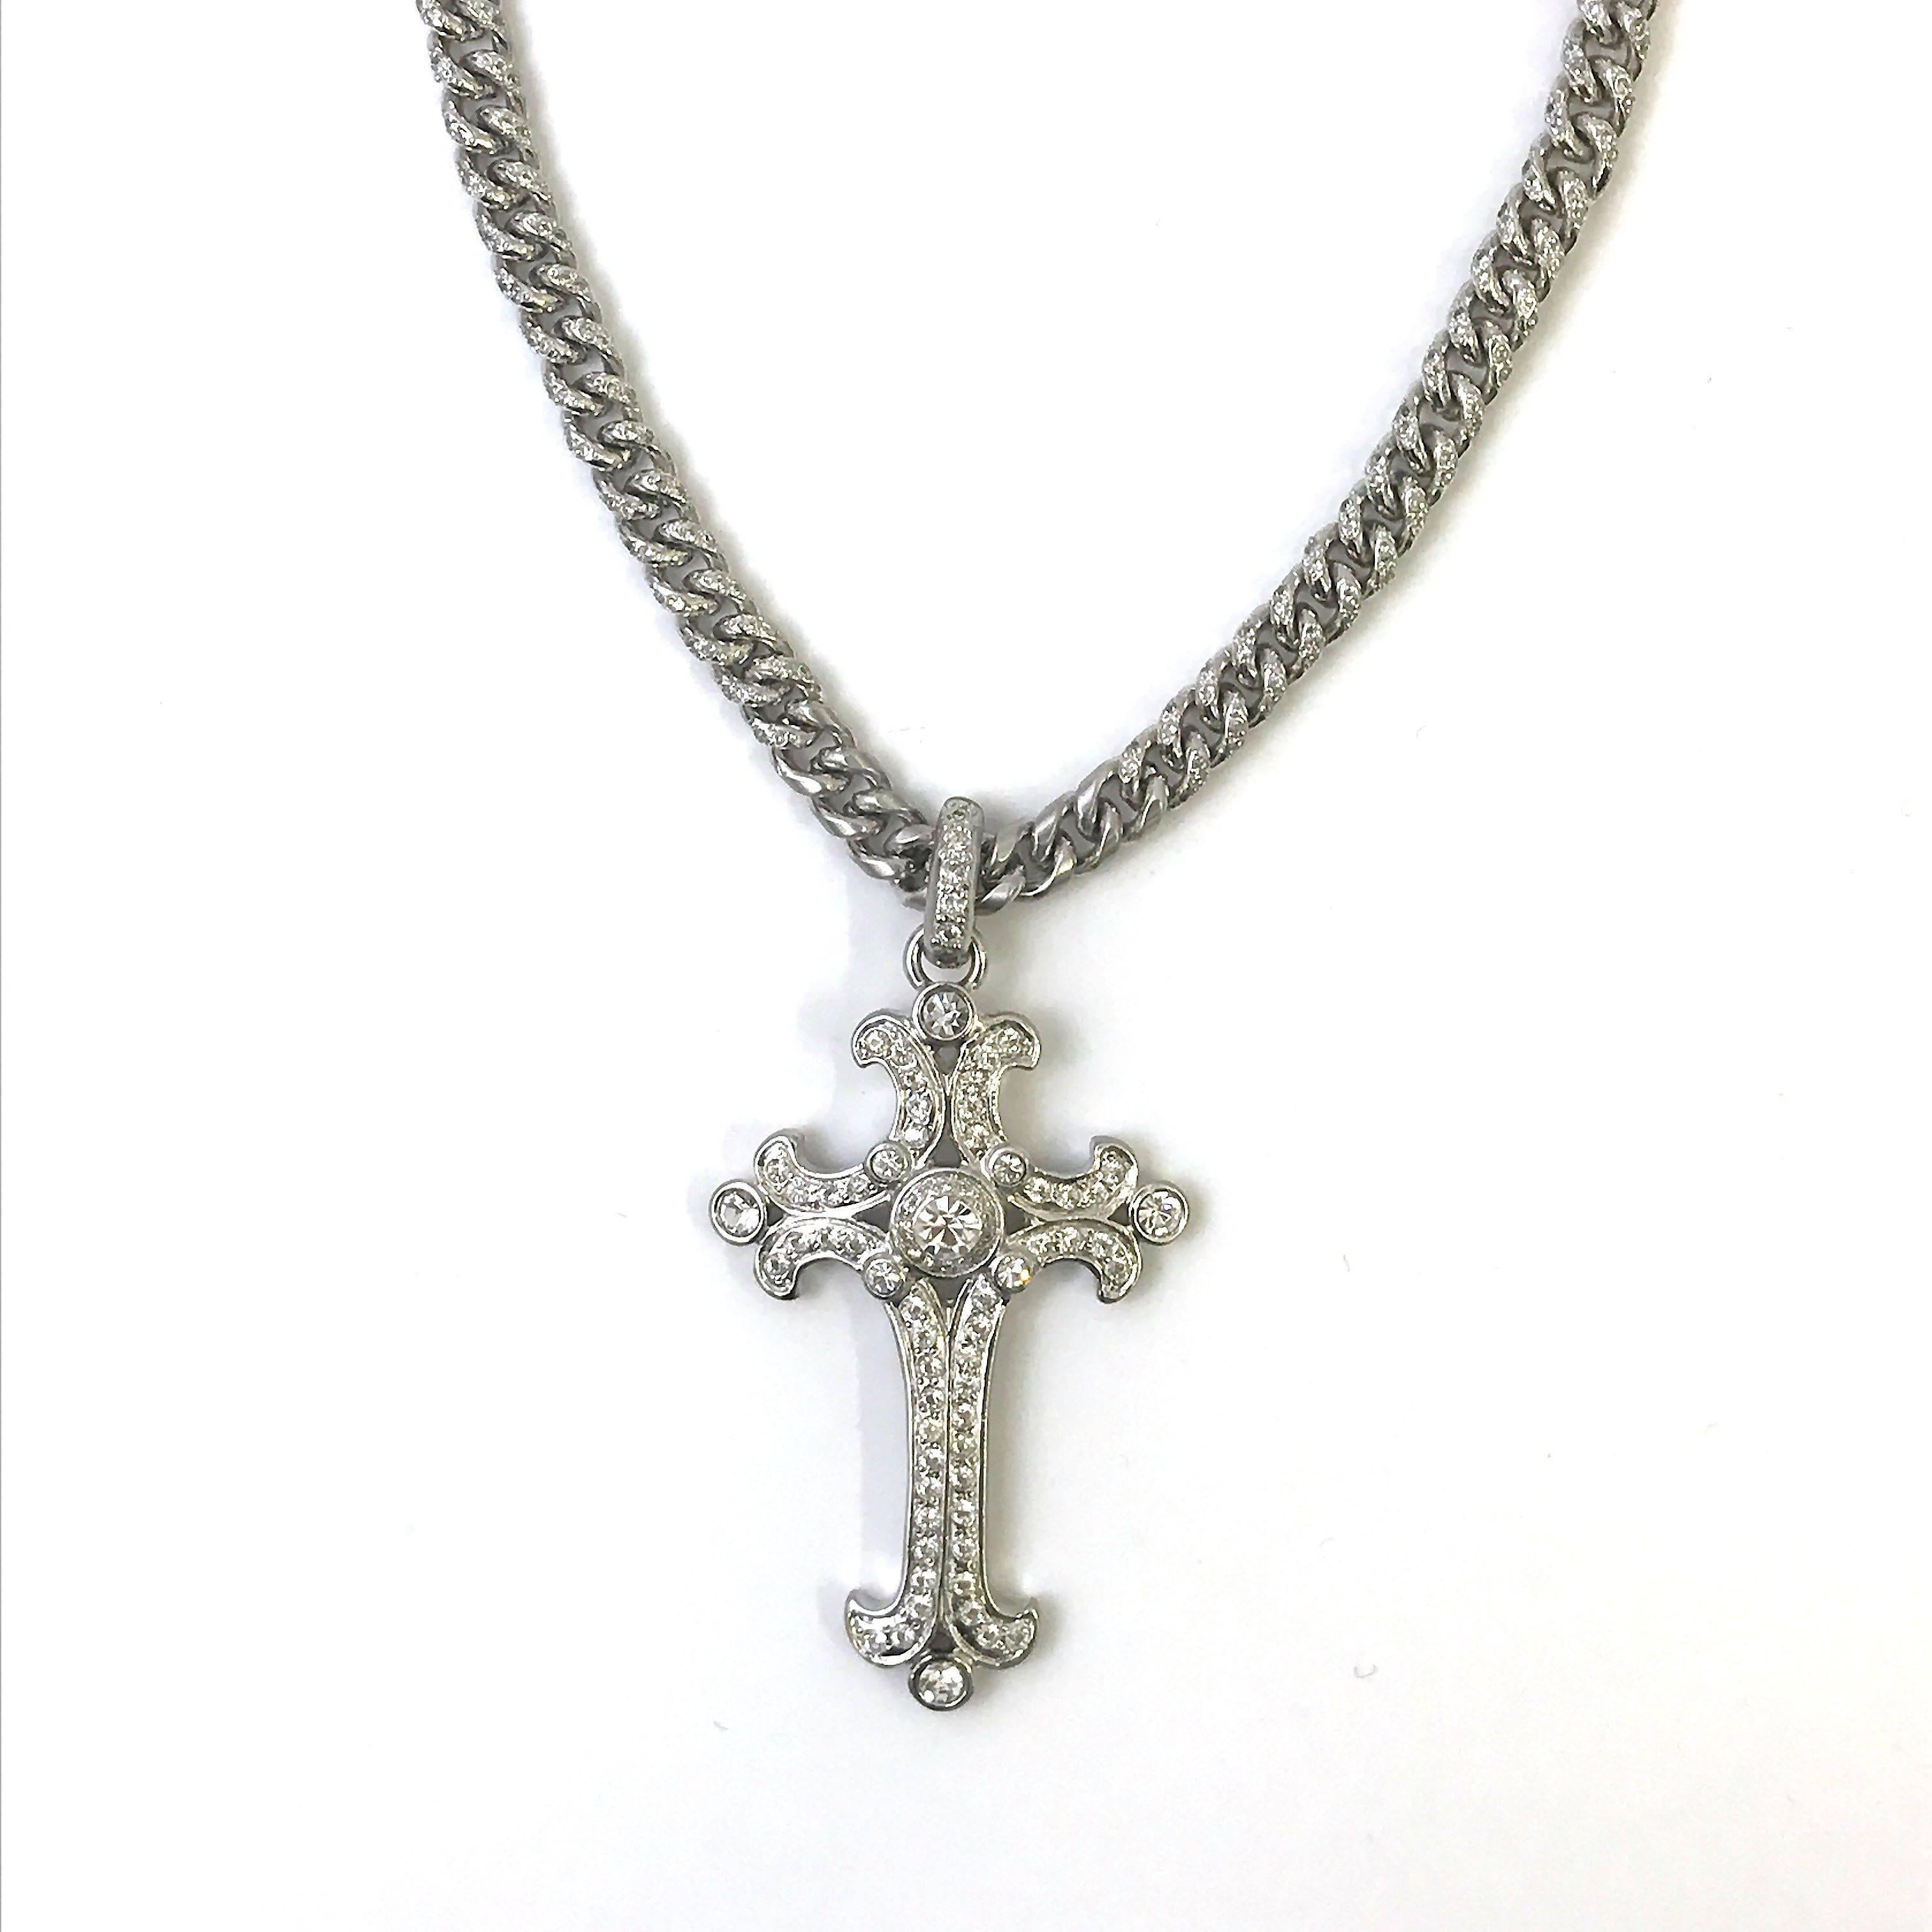 This 1990's Gianni Versace cross pendent necklace is masterpiece whilst offering a timeless classic style. The silver tone metal curb chain has a beautiful stone detail towards the pendant and the rest of the chain has a subtle brushed and polished